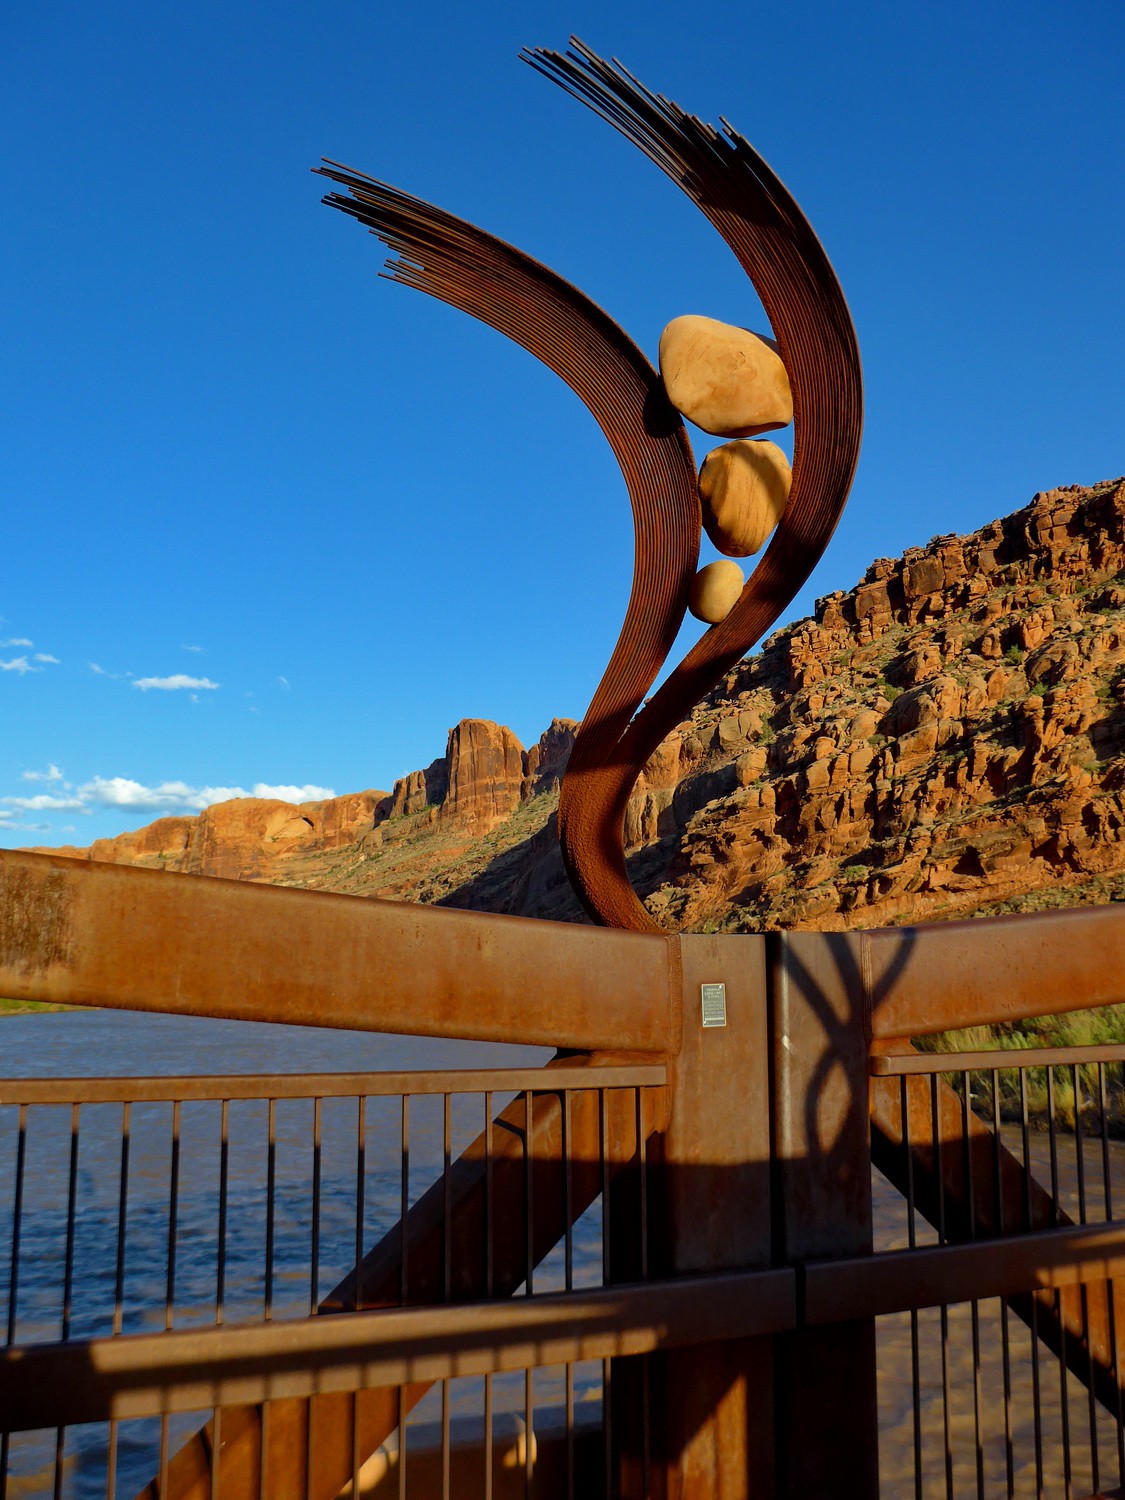 Art on the footbridge over the Colorado river north of Moab